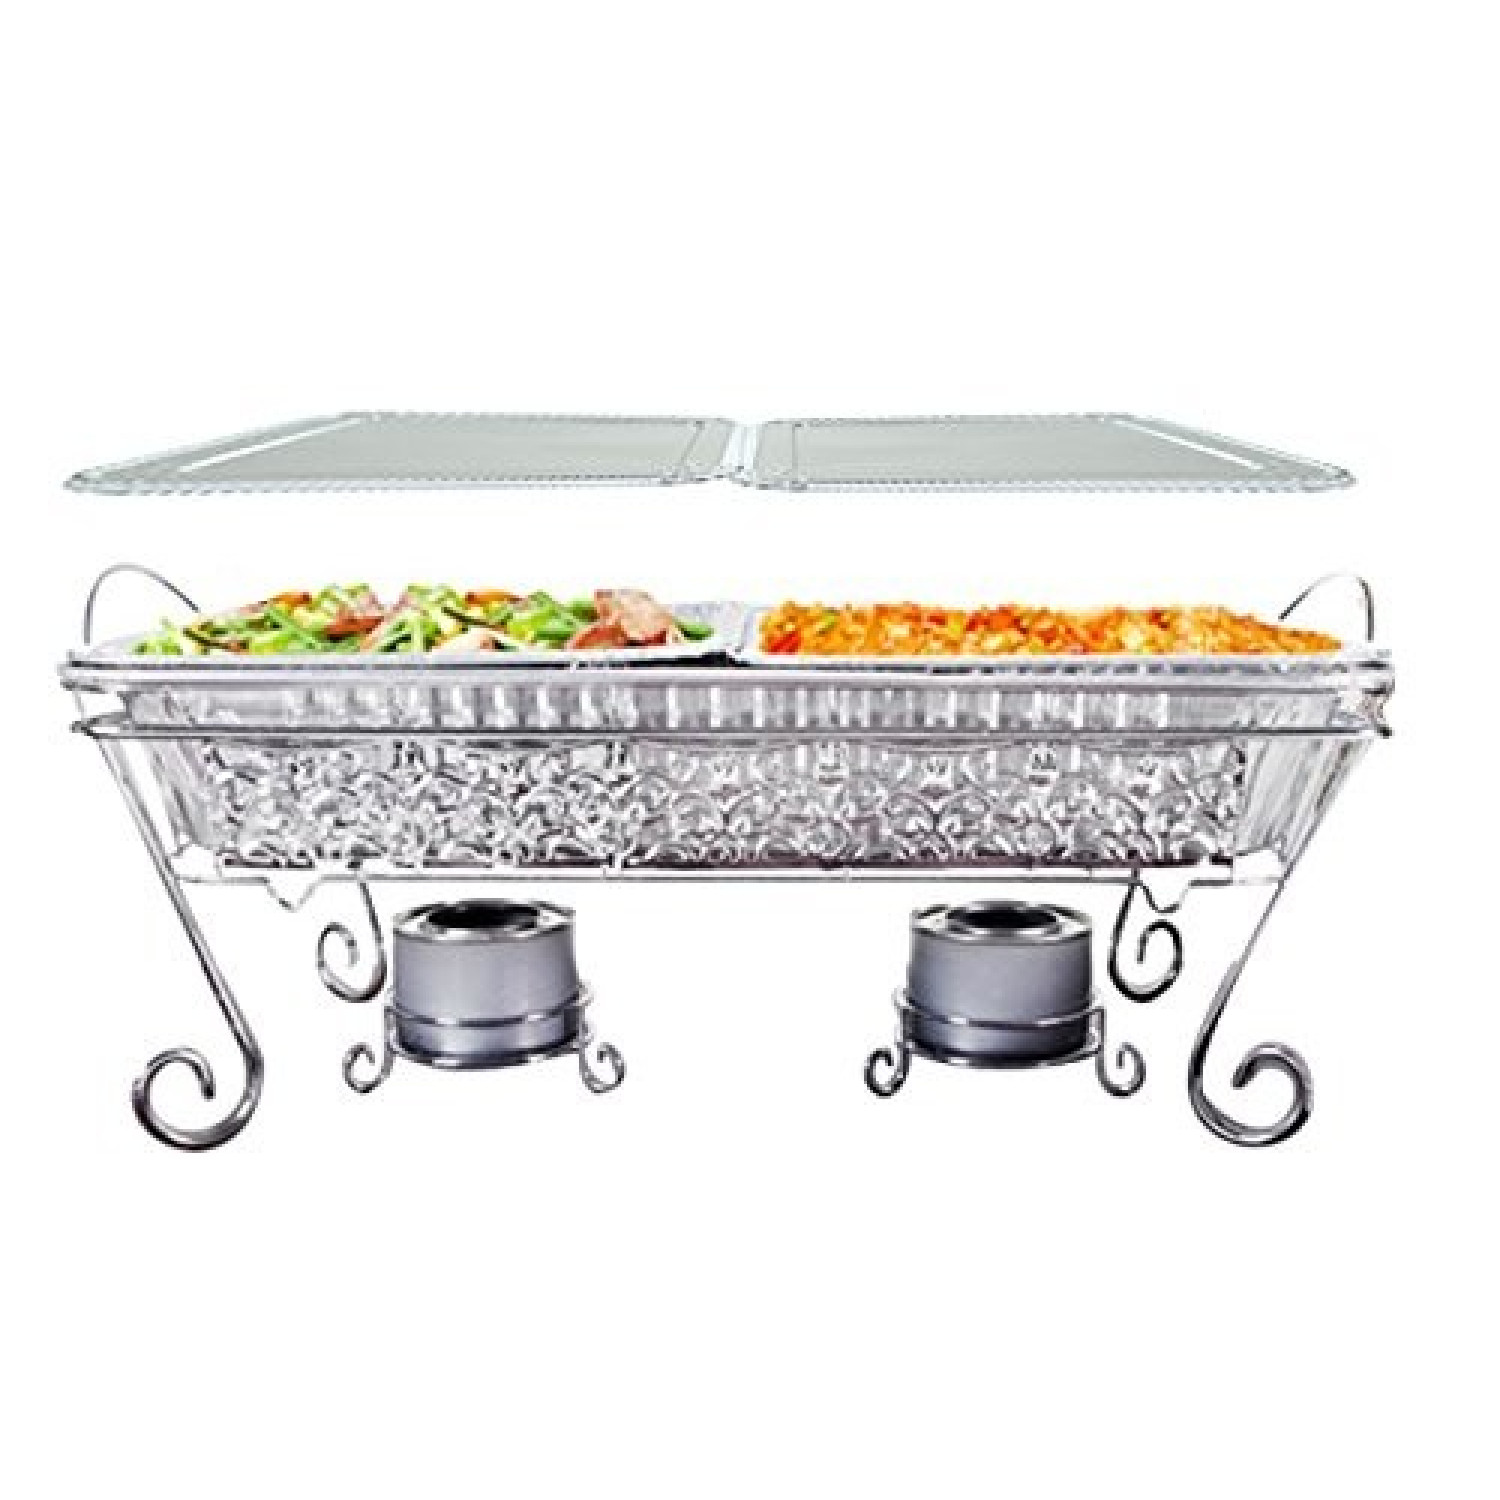 https://idlpack.com/image/cache/catalog/TigerChef-Ornate-Chrome-Wire-Disposable-Full-Size-Chafer-Stand-Set---11-pcs-277199_large-1500x1500.jpg